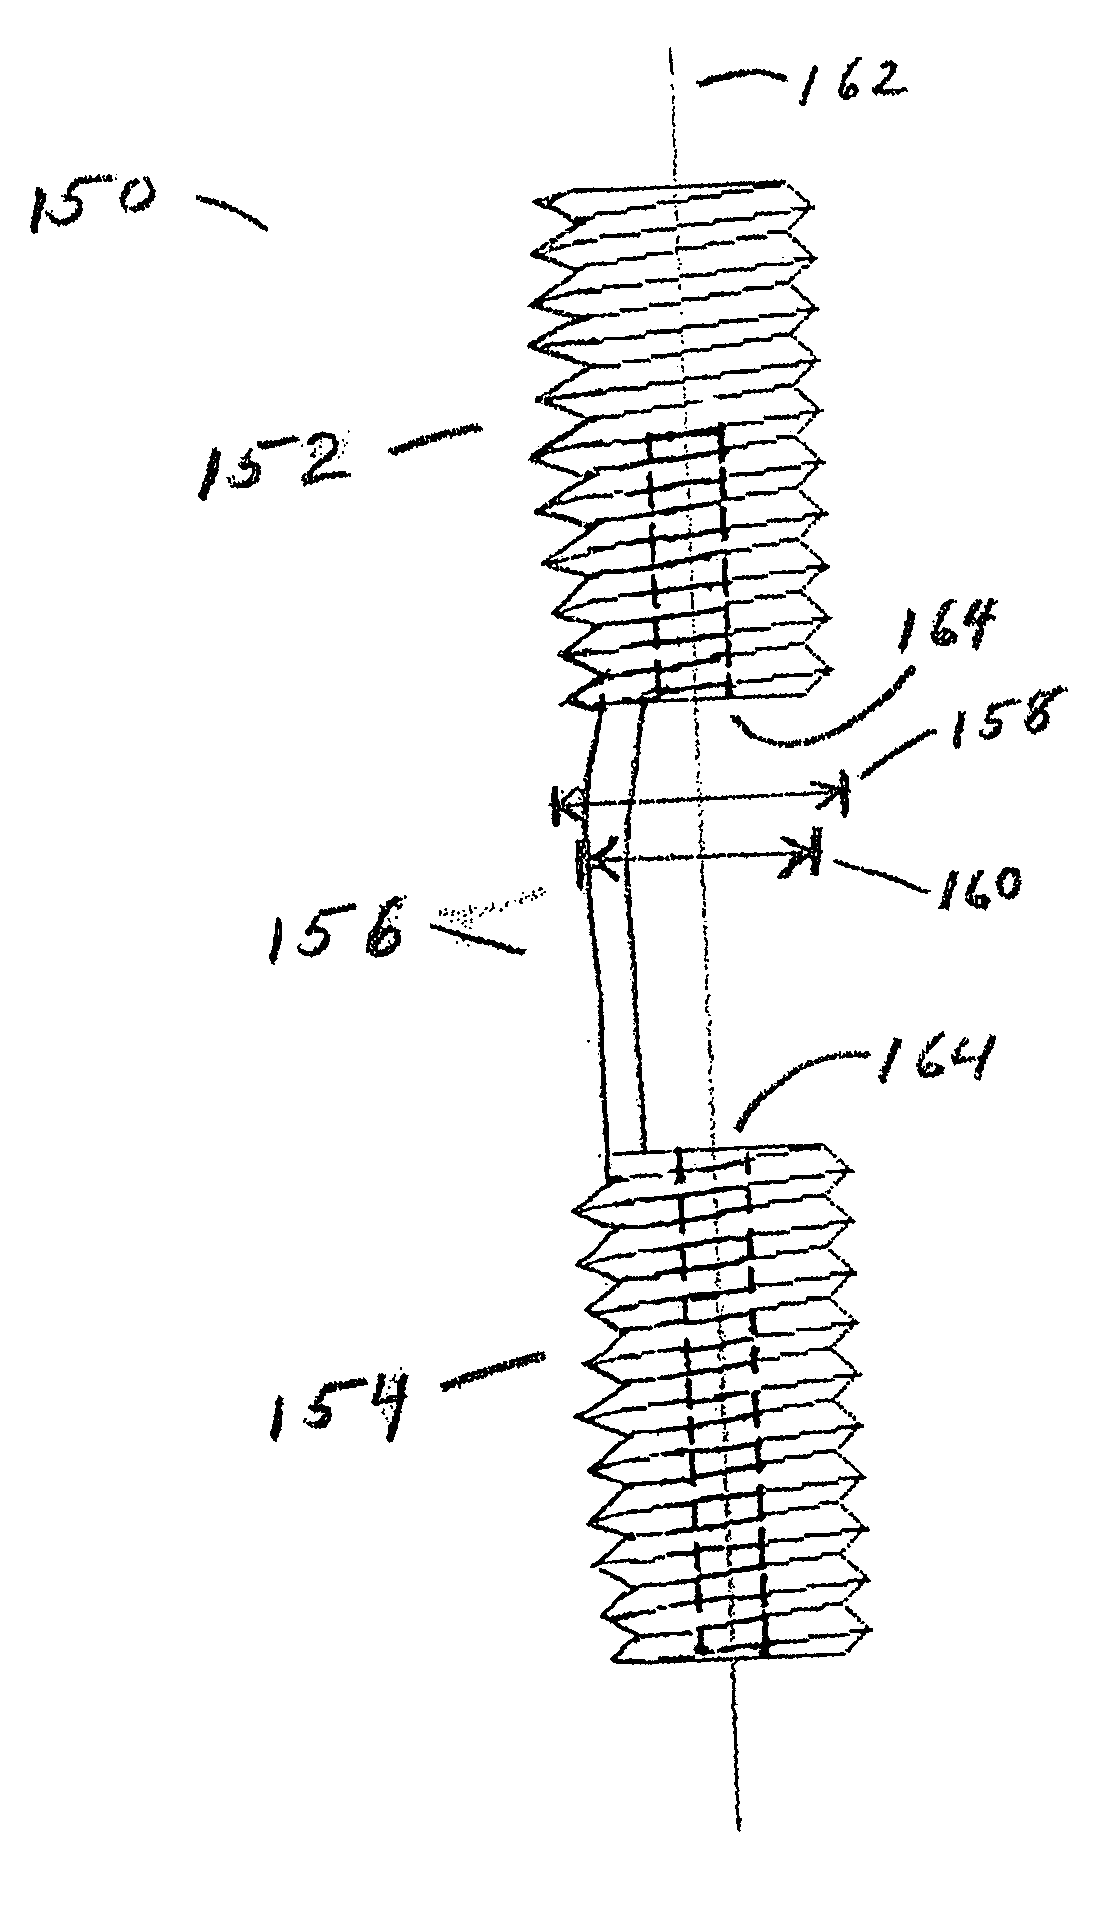 Arthroscopic implants with integral fixation devices and method for use